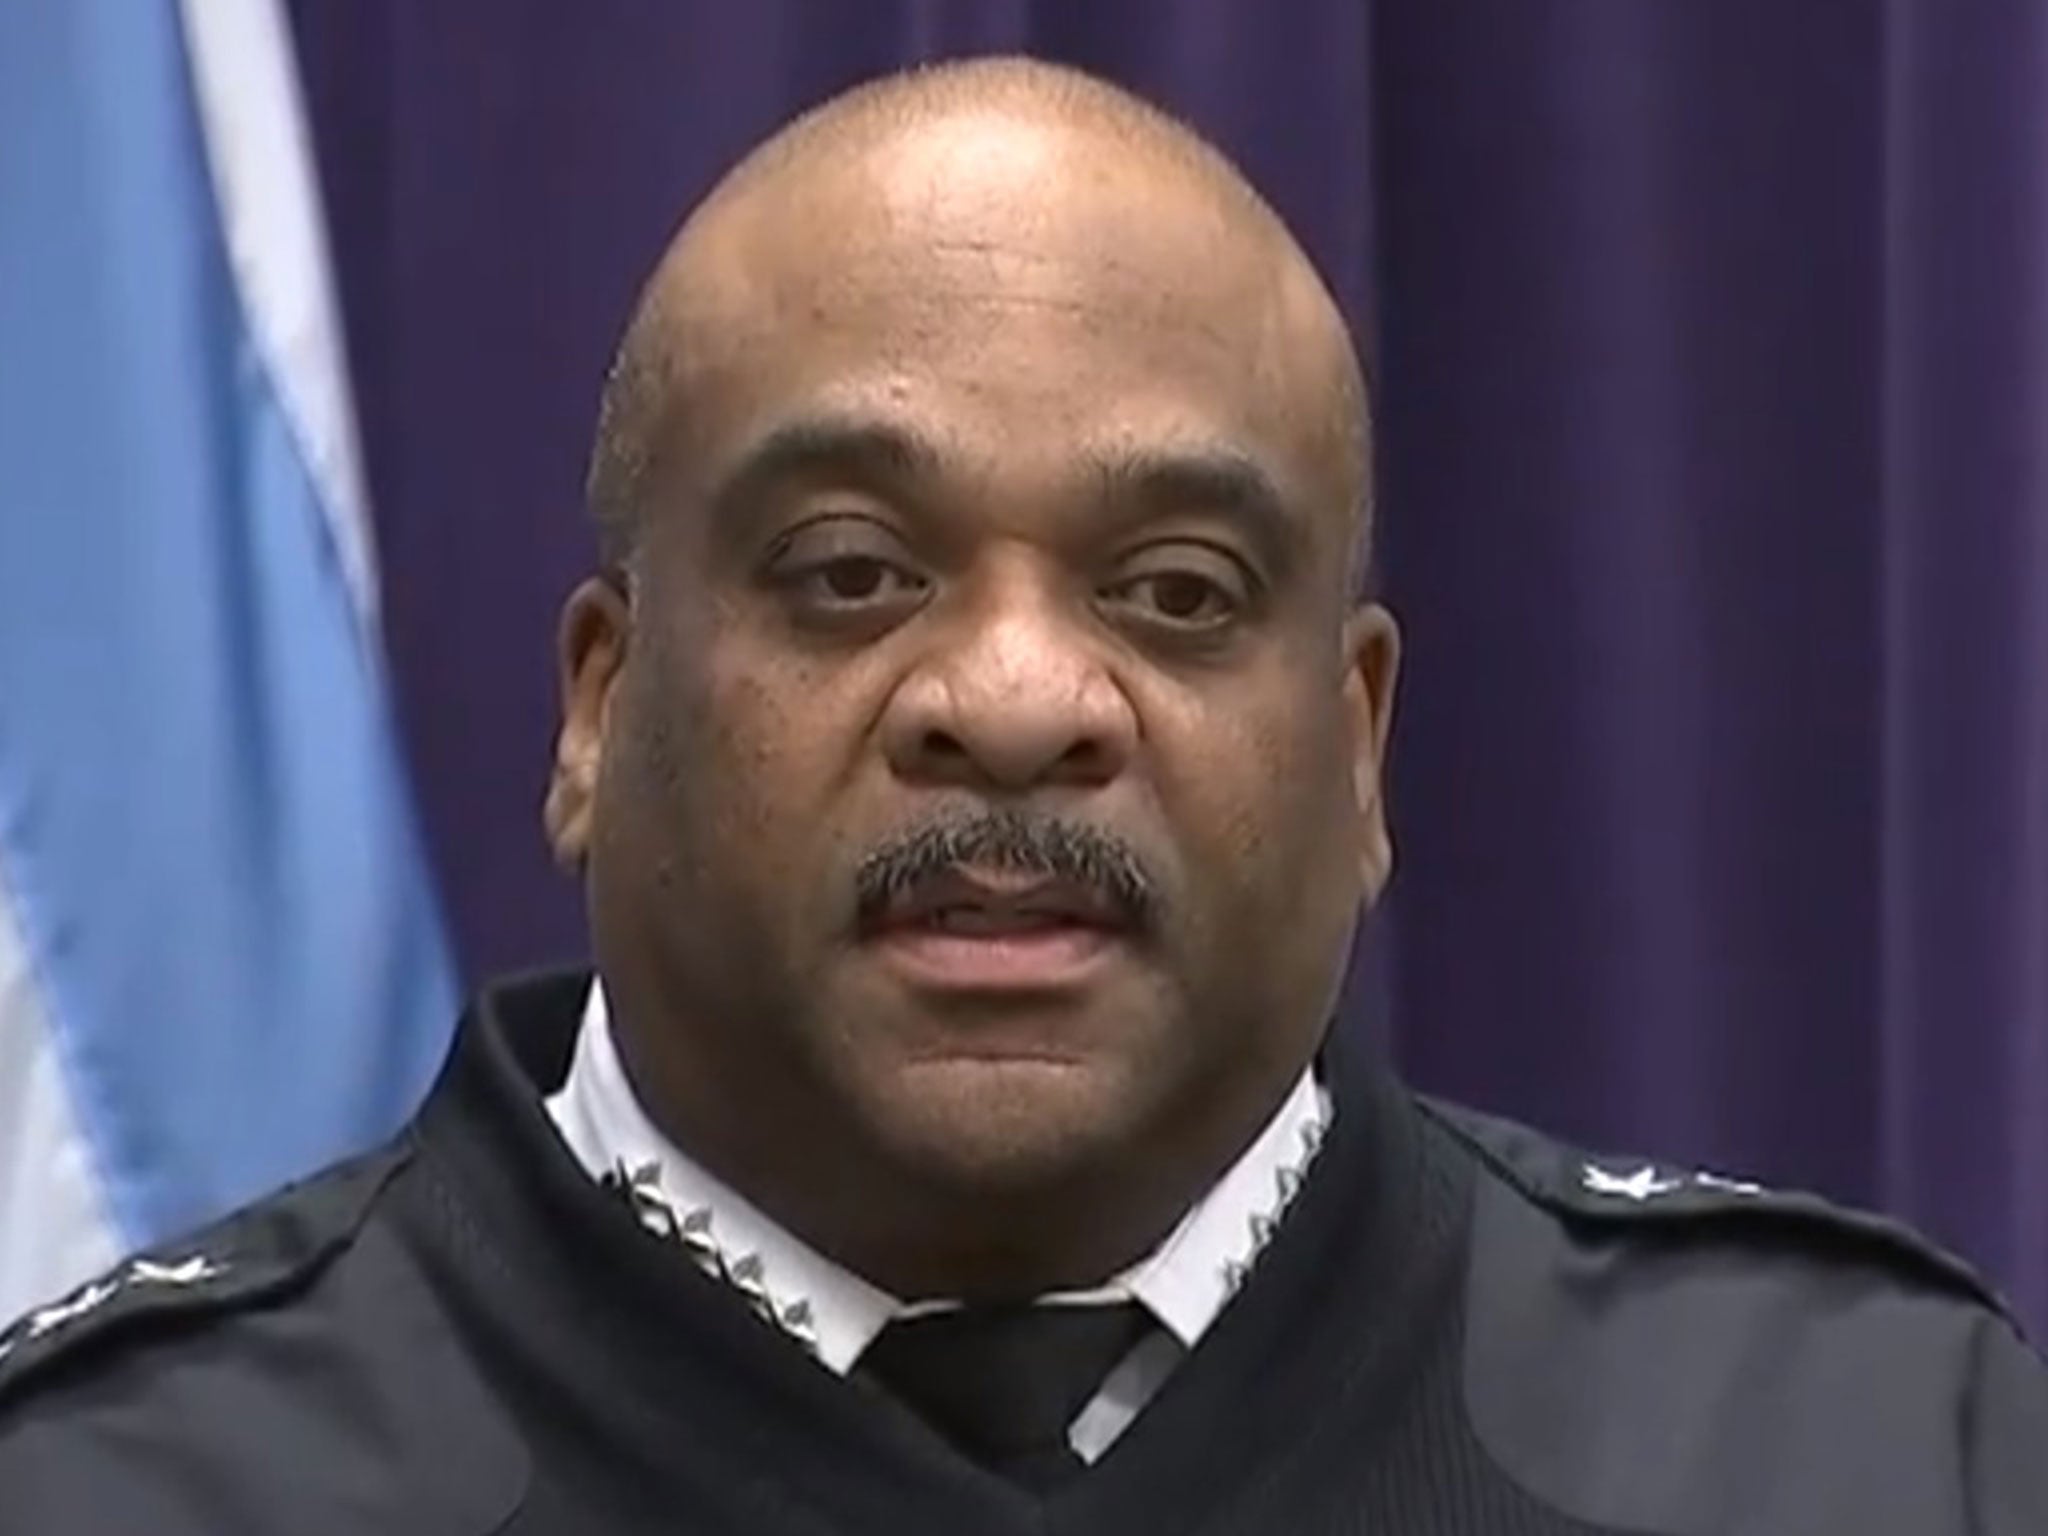 Police Supt Eddie Johnson implied the attack was not politically motivated and referred to the Donald Trump insults as 'stupidity' Fox 32/screengrab